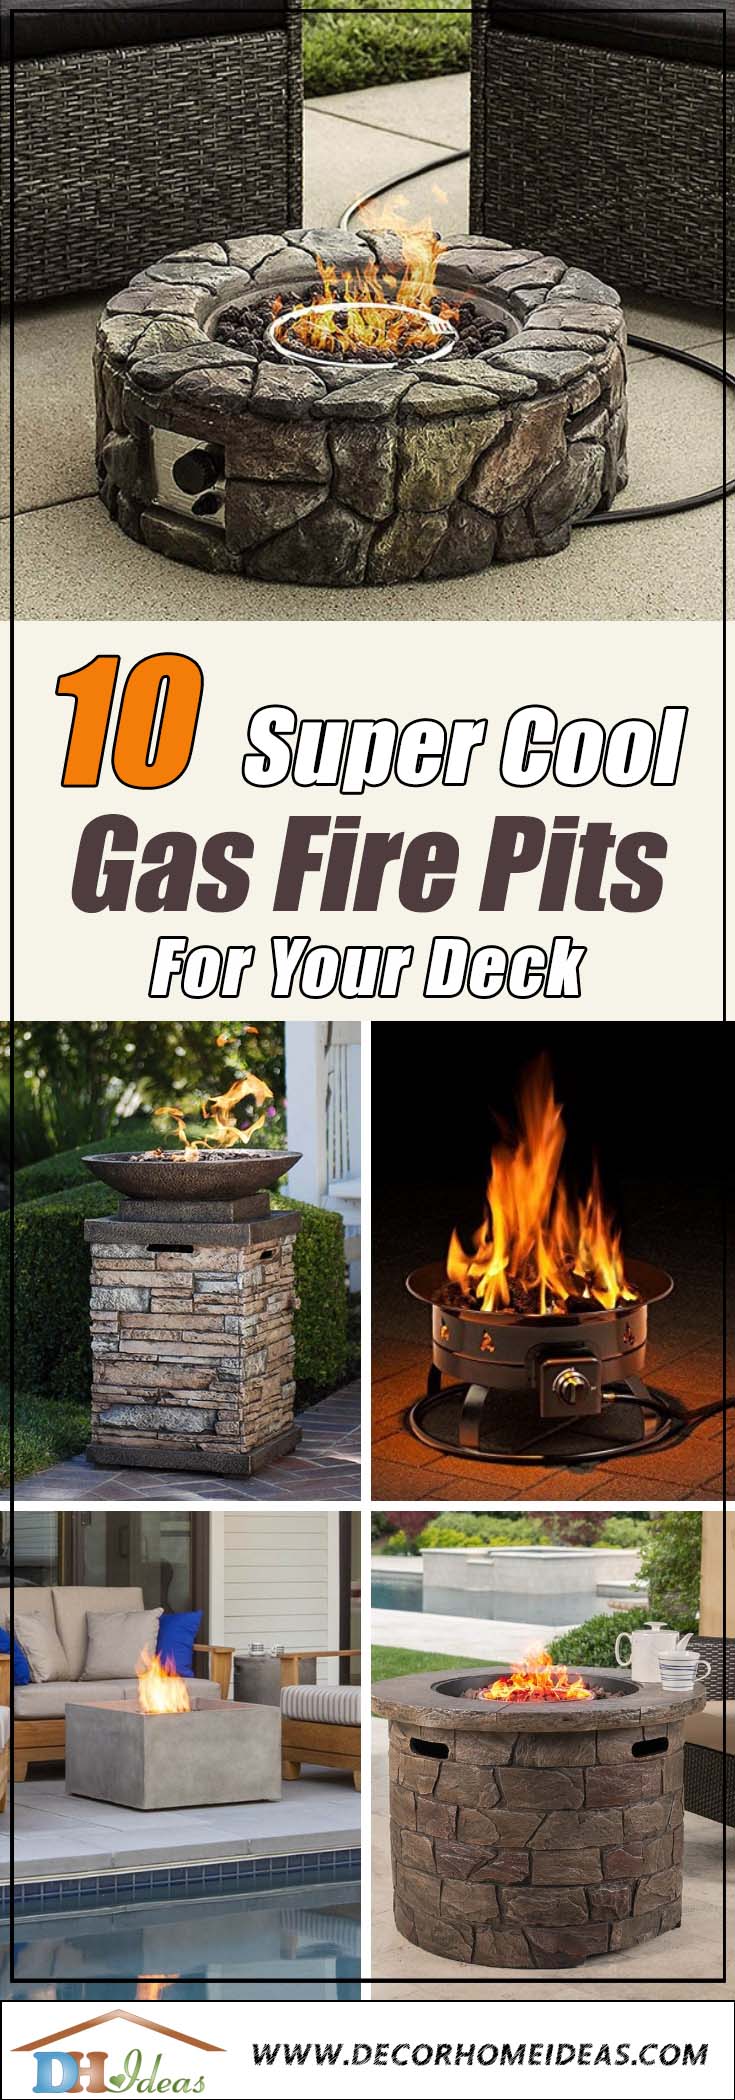 10 Best Gas Fire Pits For Deck In 2022 | Decor Home Ideas